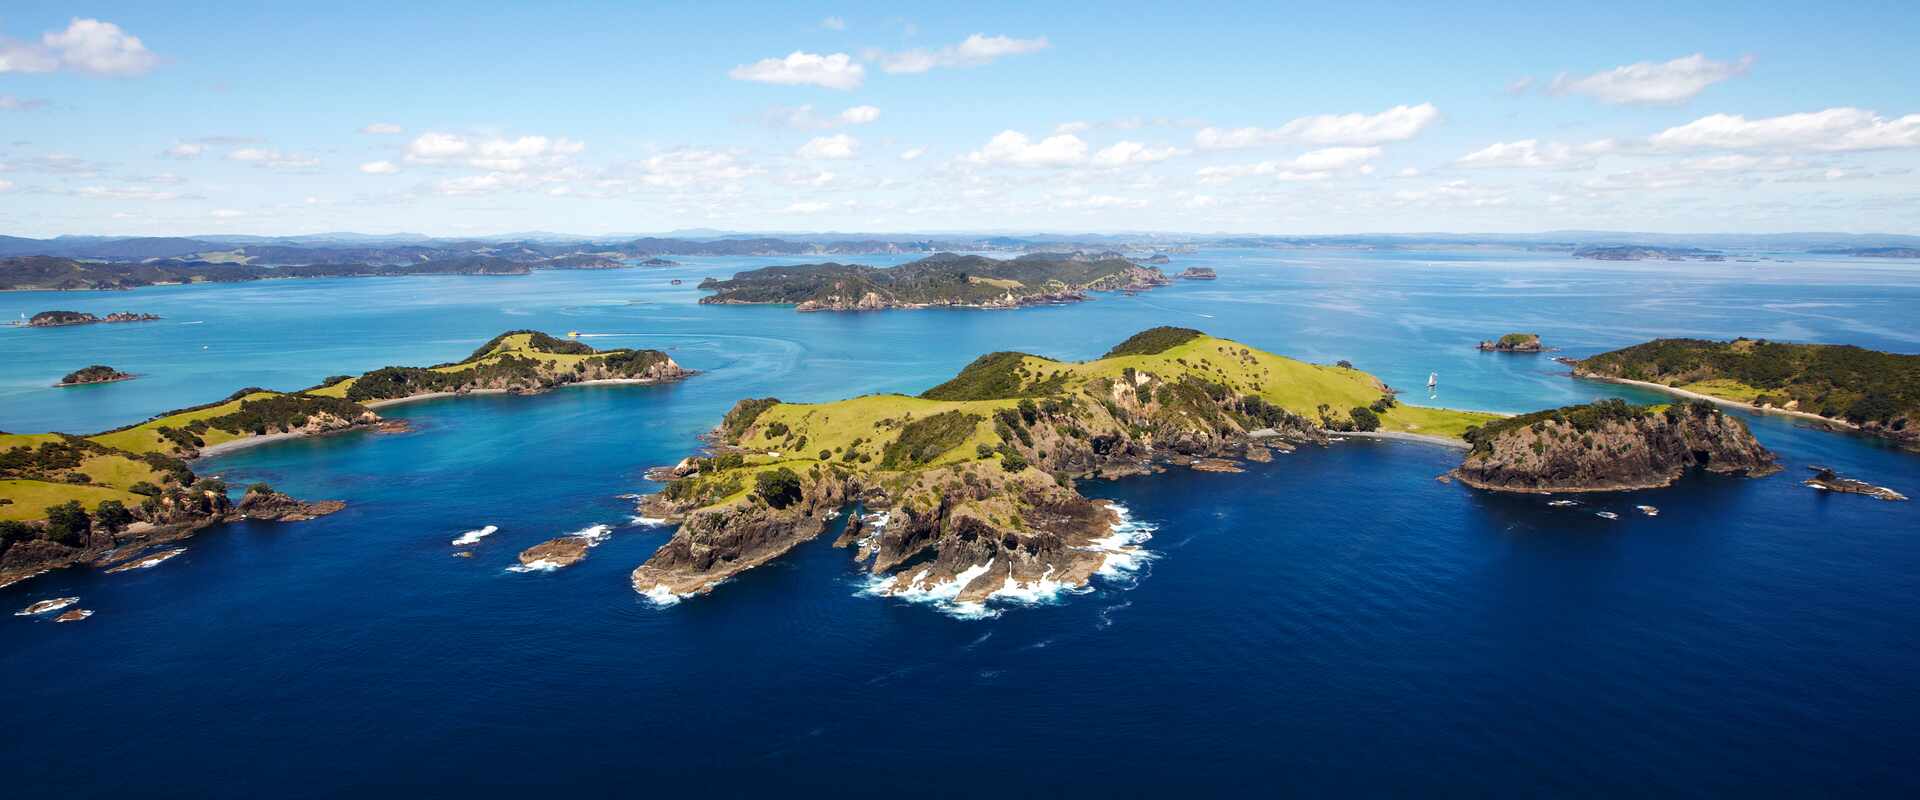 Aerial view of the Bay of Islands